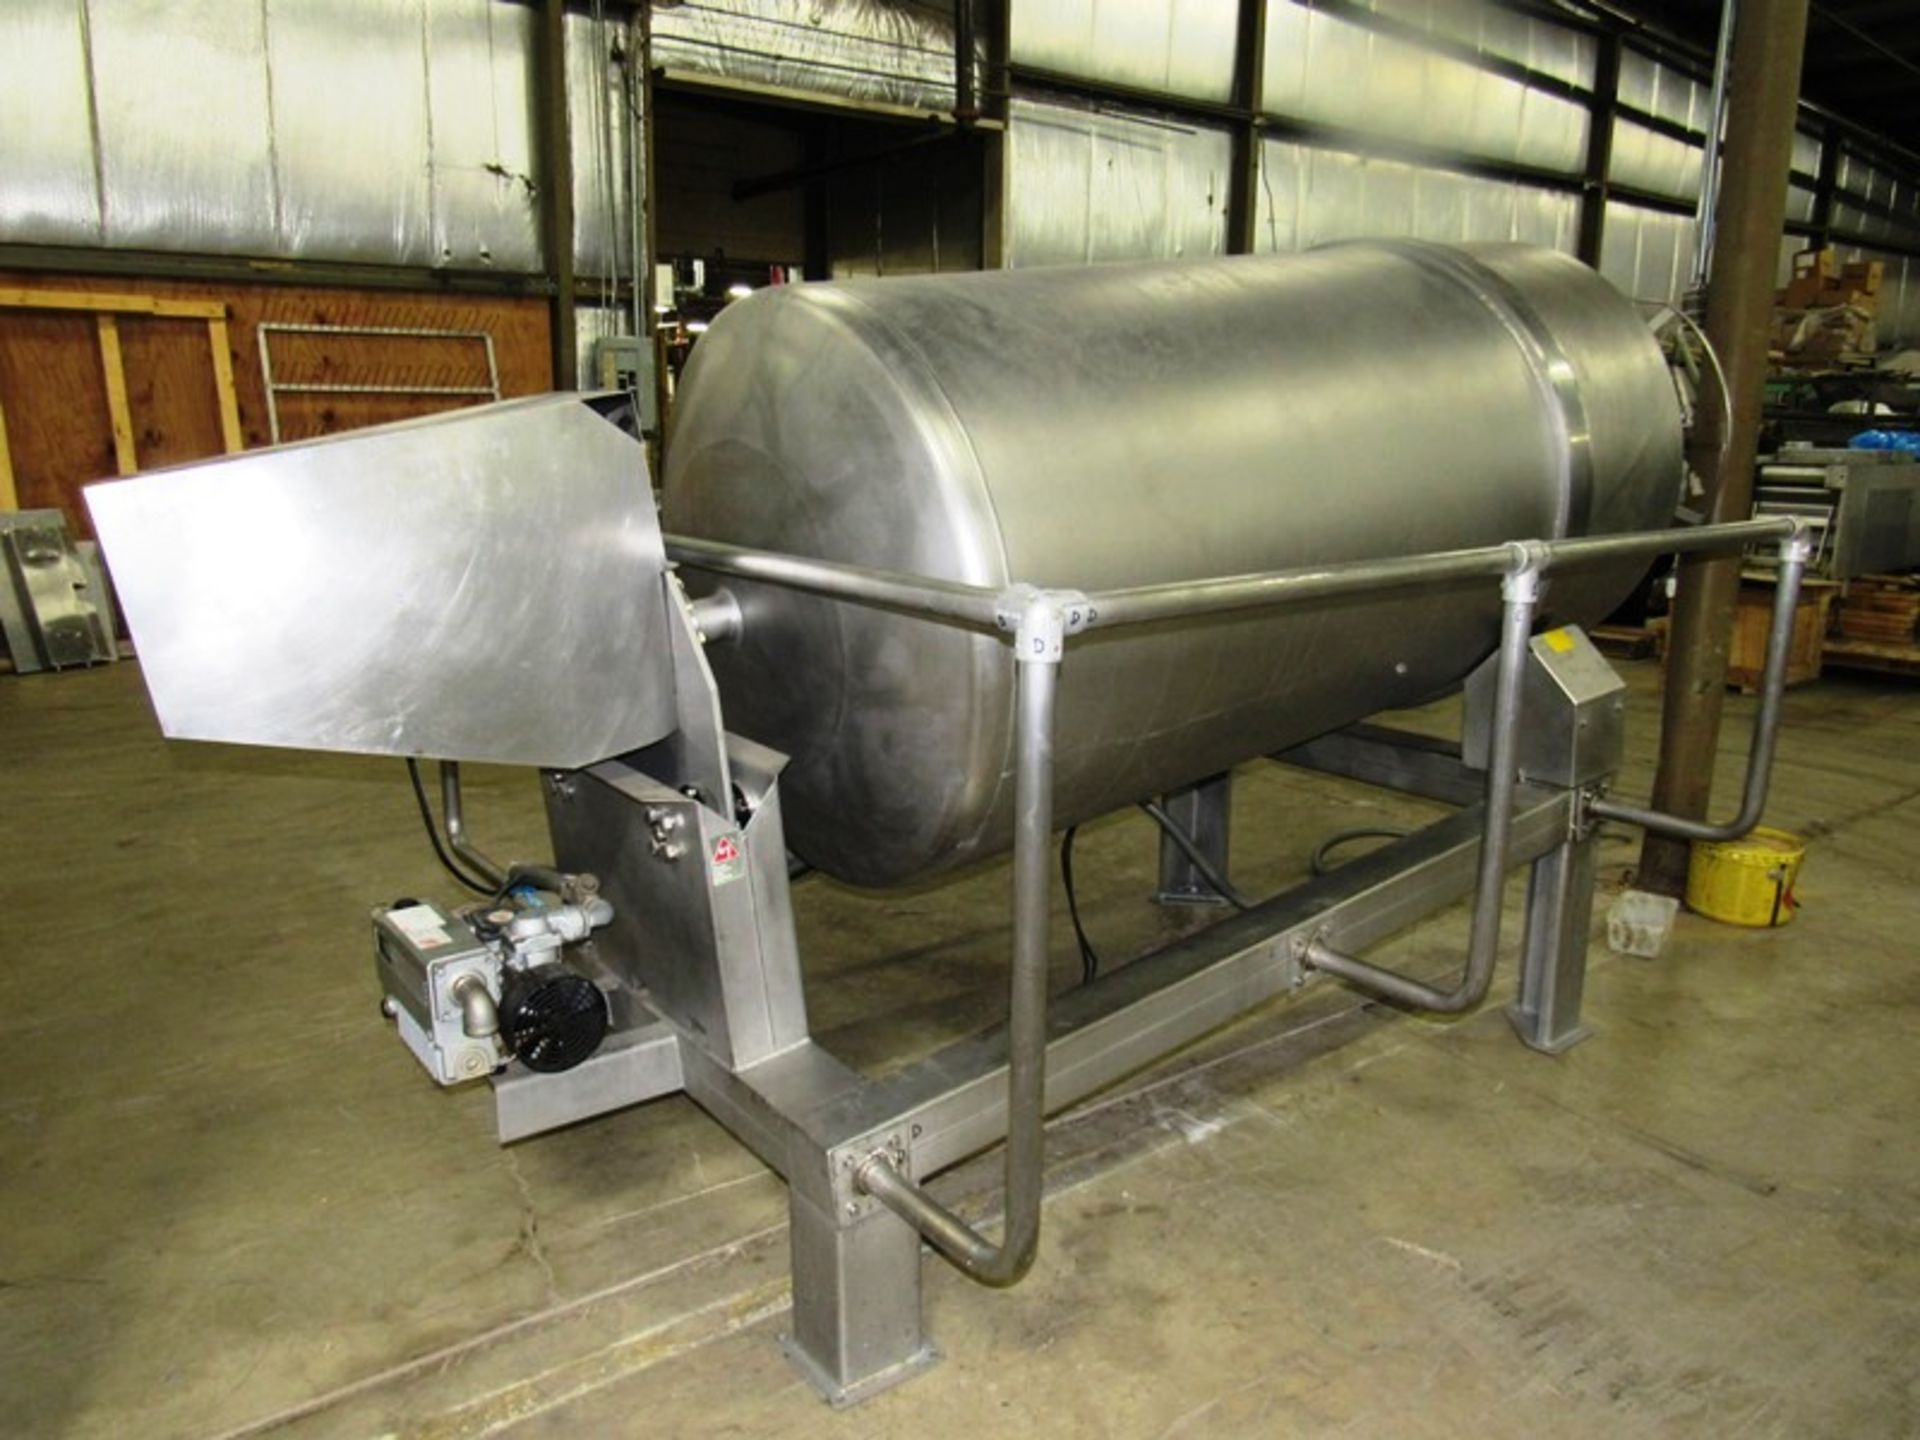 Sipromac Mdl VT2000 S.S. Vacuum Tumbler, 2,000 LB/907Kg, variable speed, reverse rotation for - Image 3 of 8